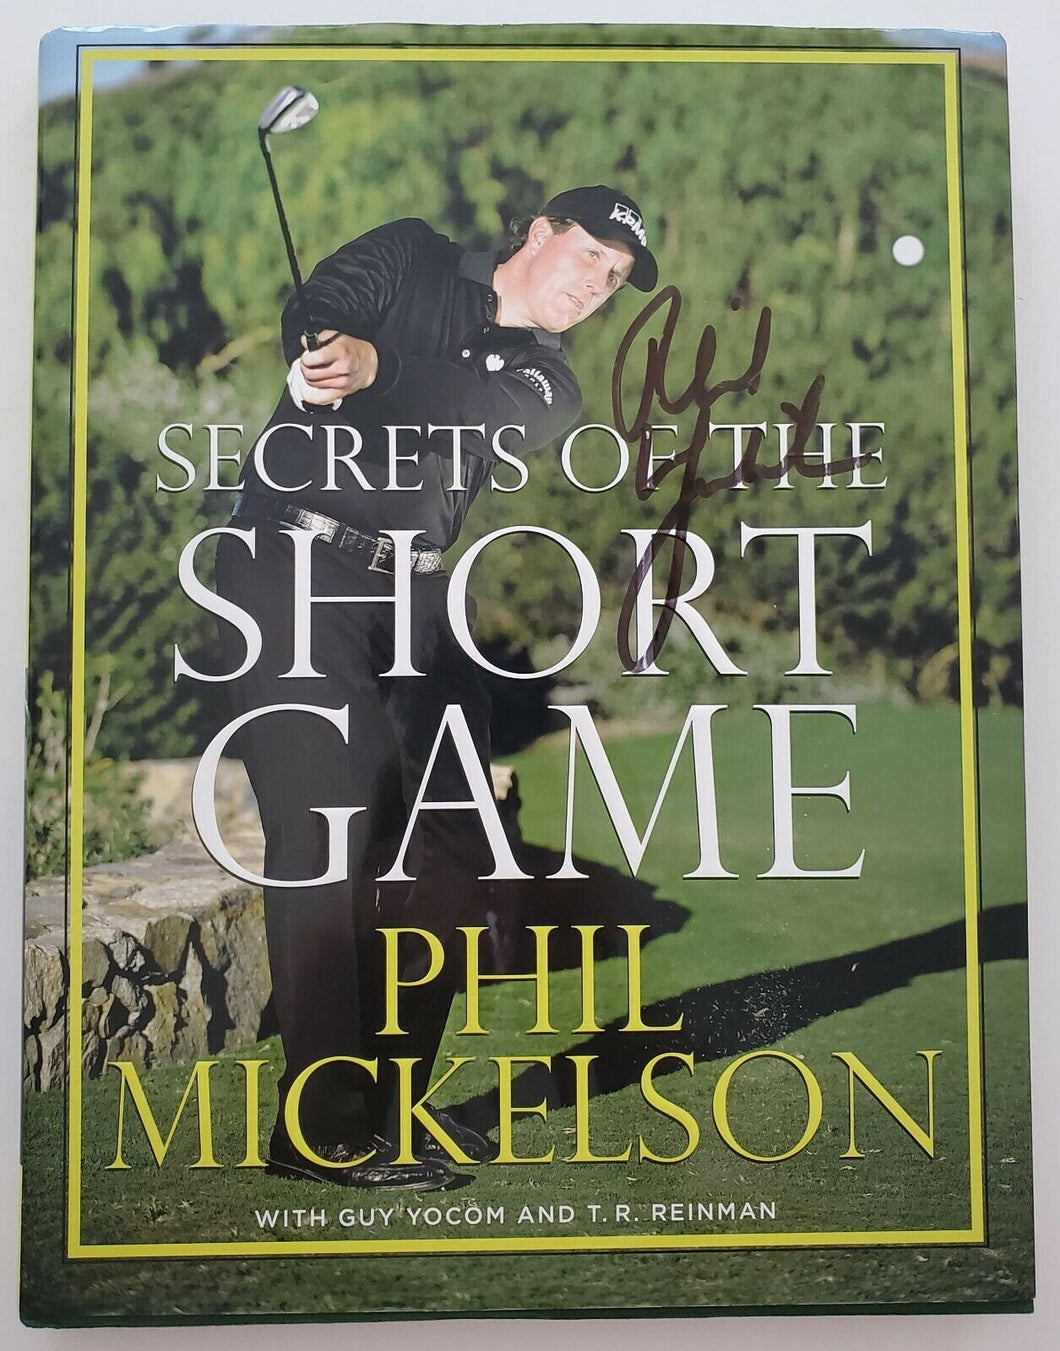 The Secrets Of The Short Game - Signed by Phil Mickelson